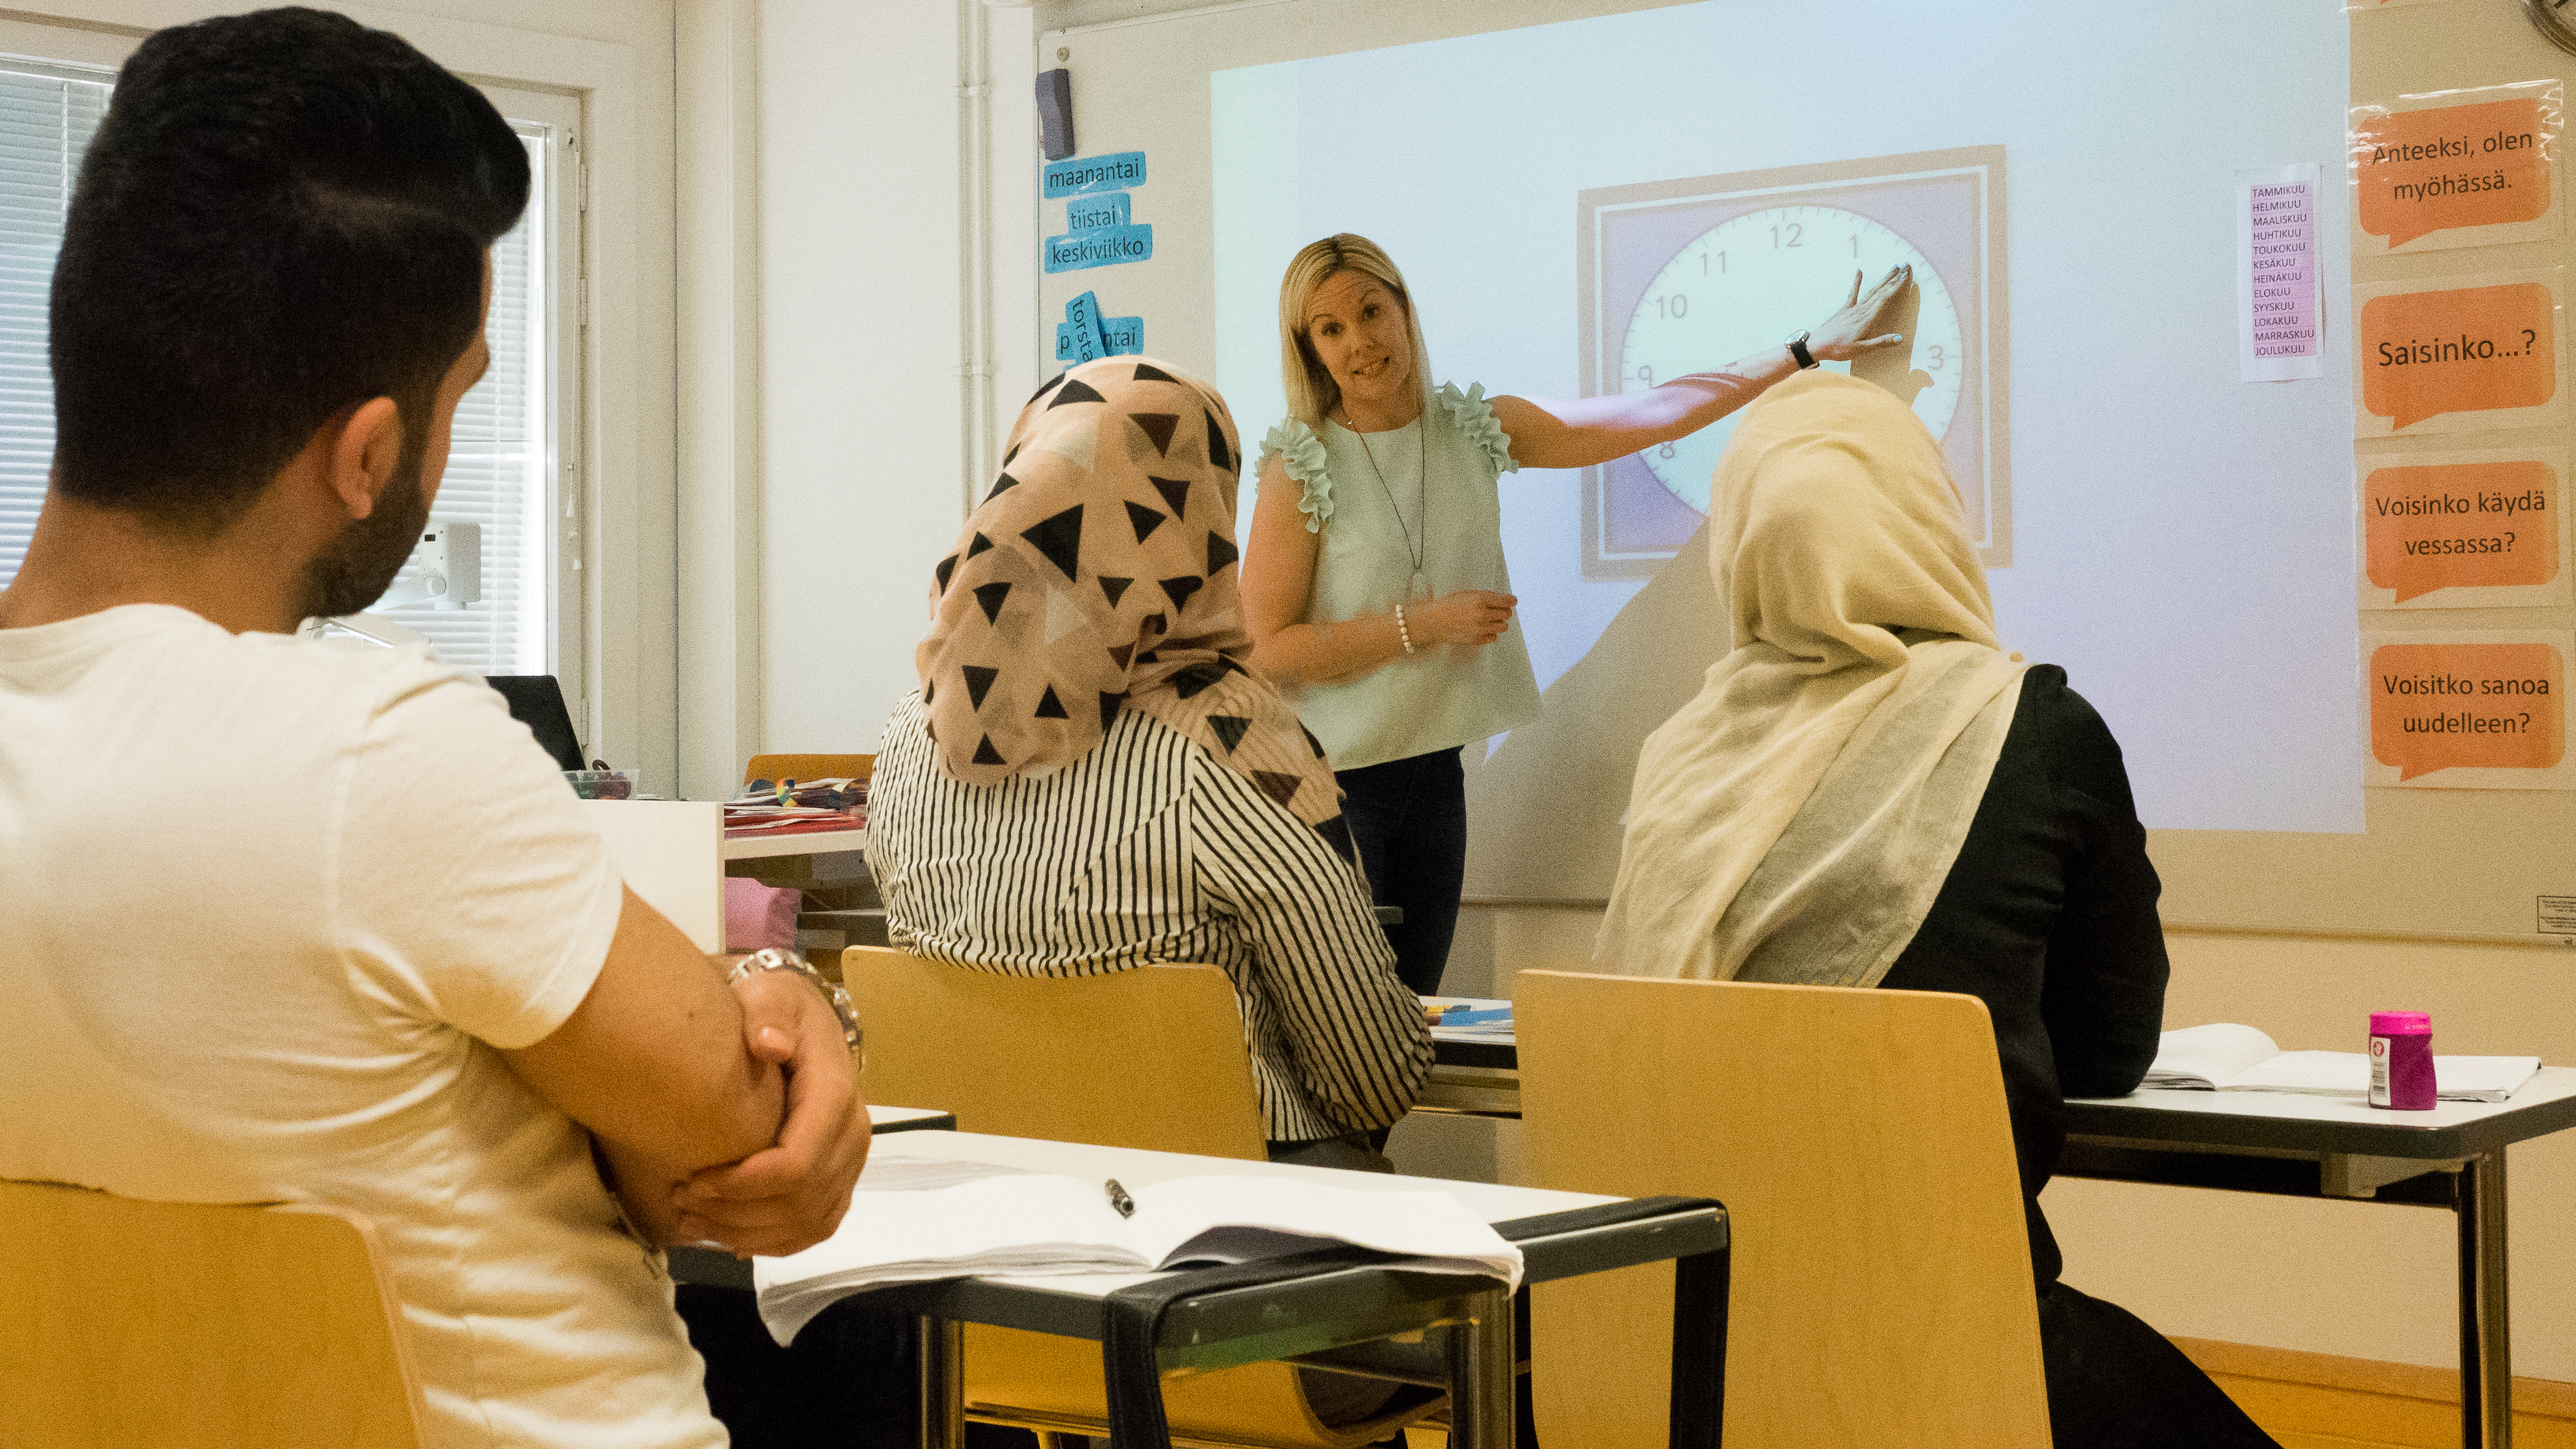 The biggest jump in foreign language speakers in Finland